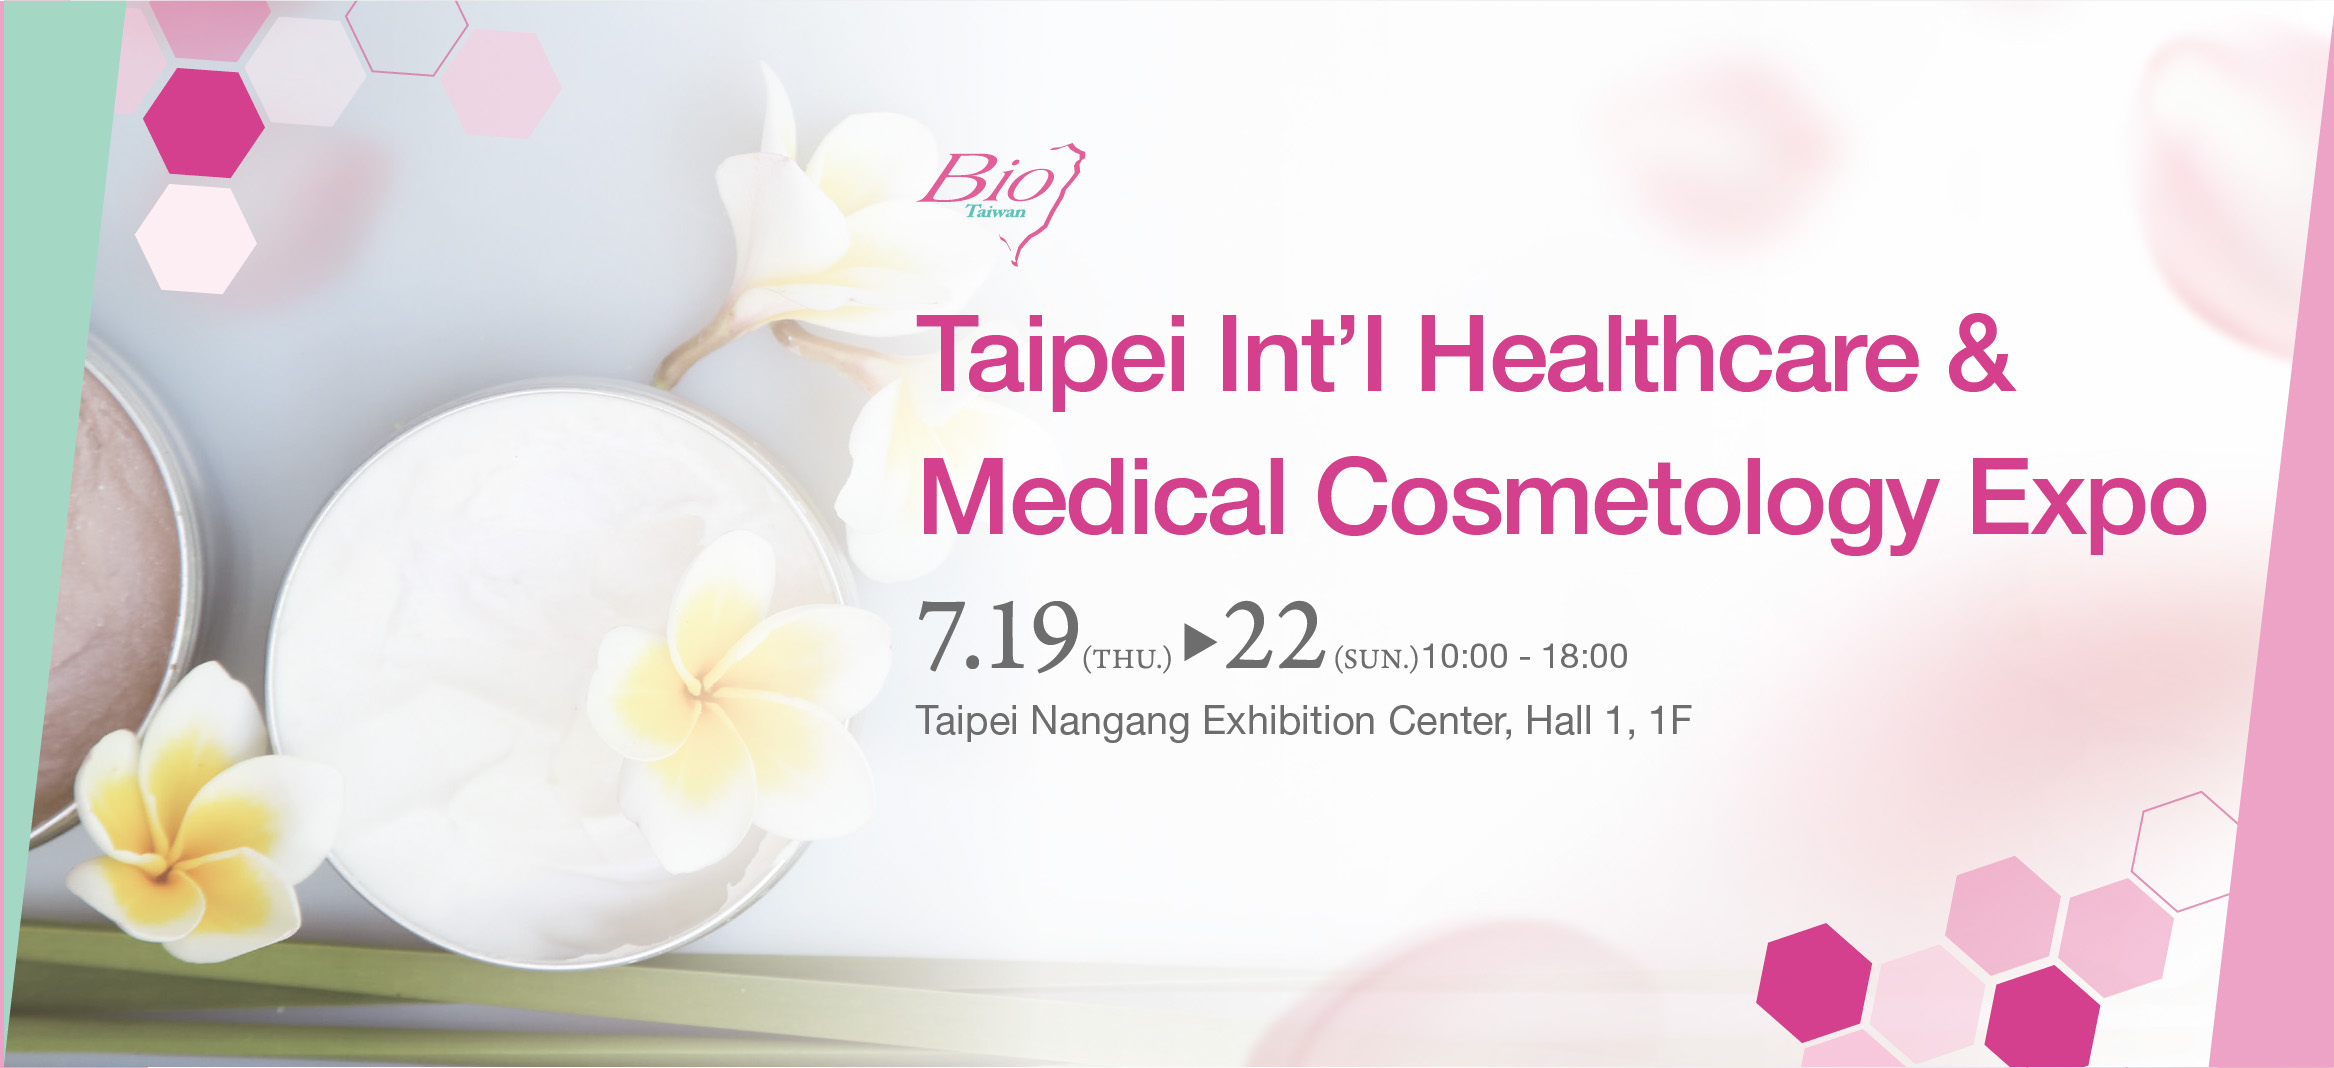 Taipei Int’l Healthcare & Medical Cosmetology Expo